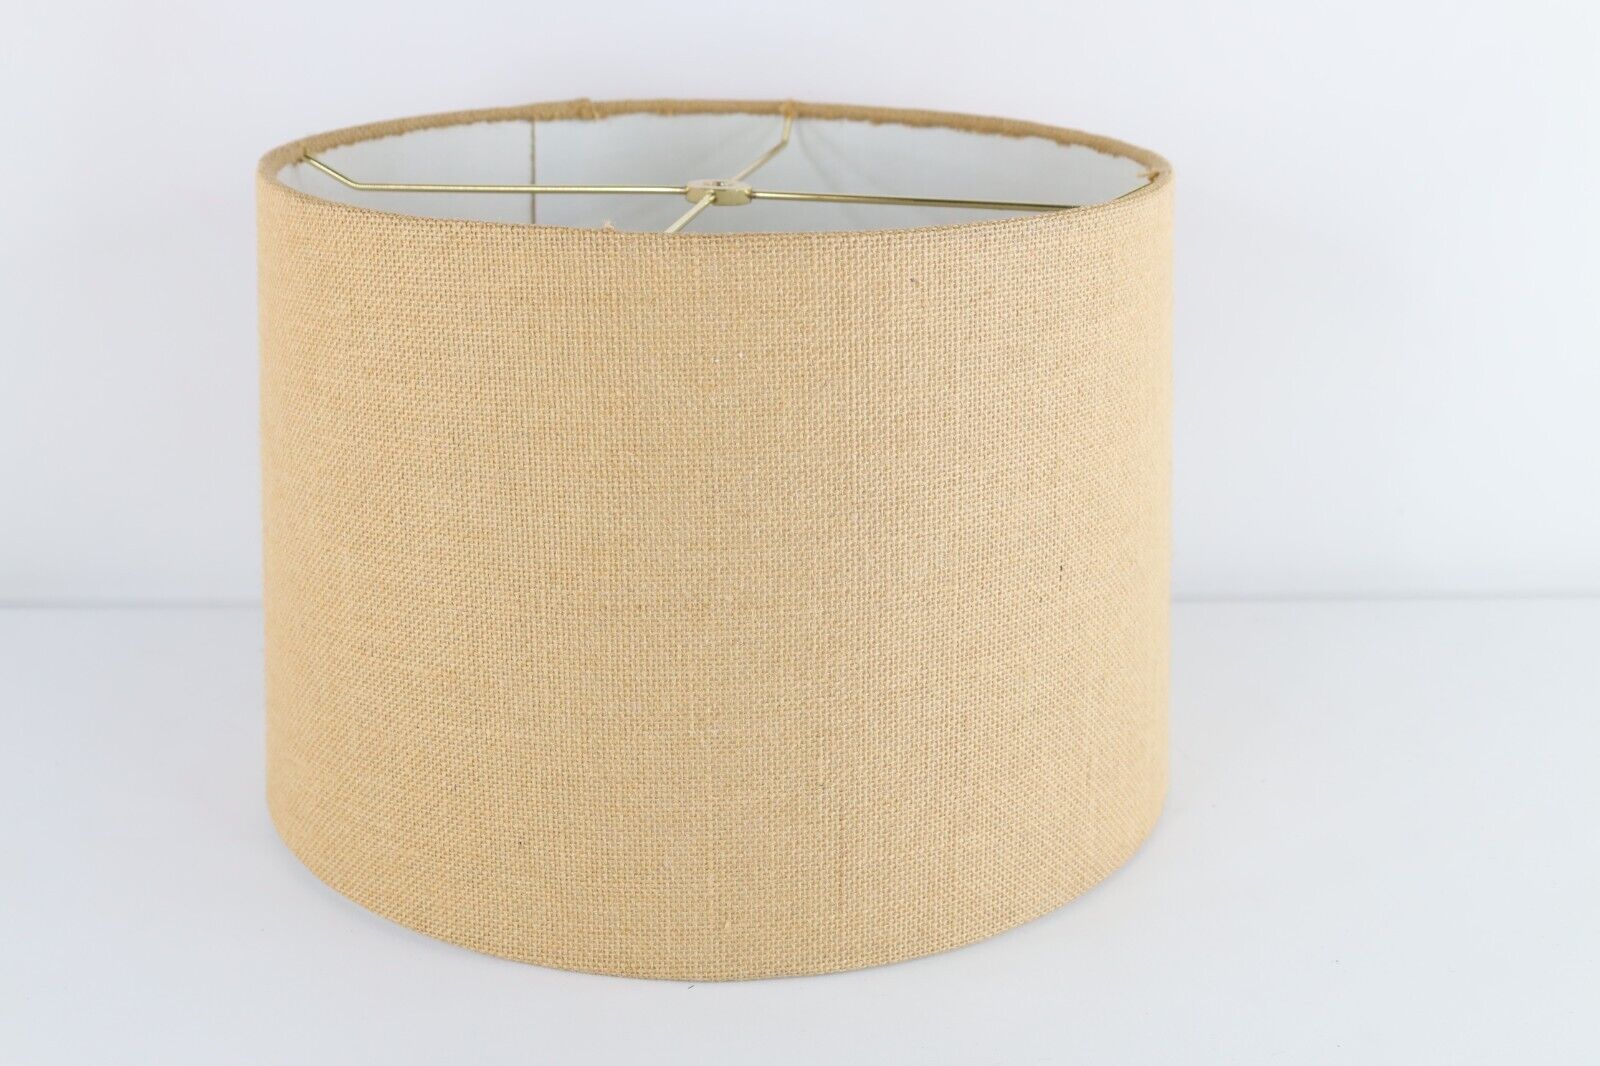 Vintage 70s Mid Century Modern MCM Burlap Lamp Shade Replacement Cover Beige